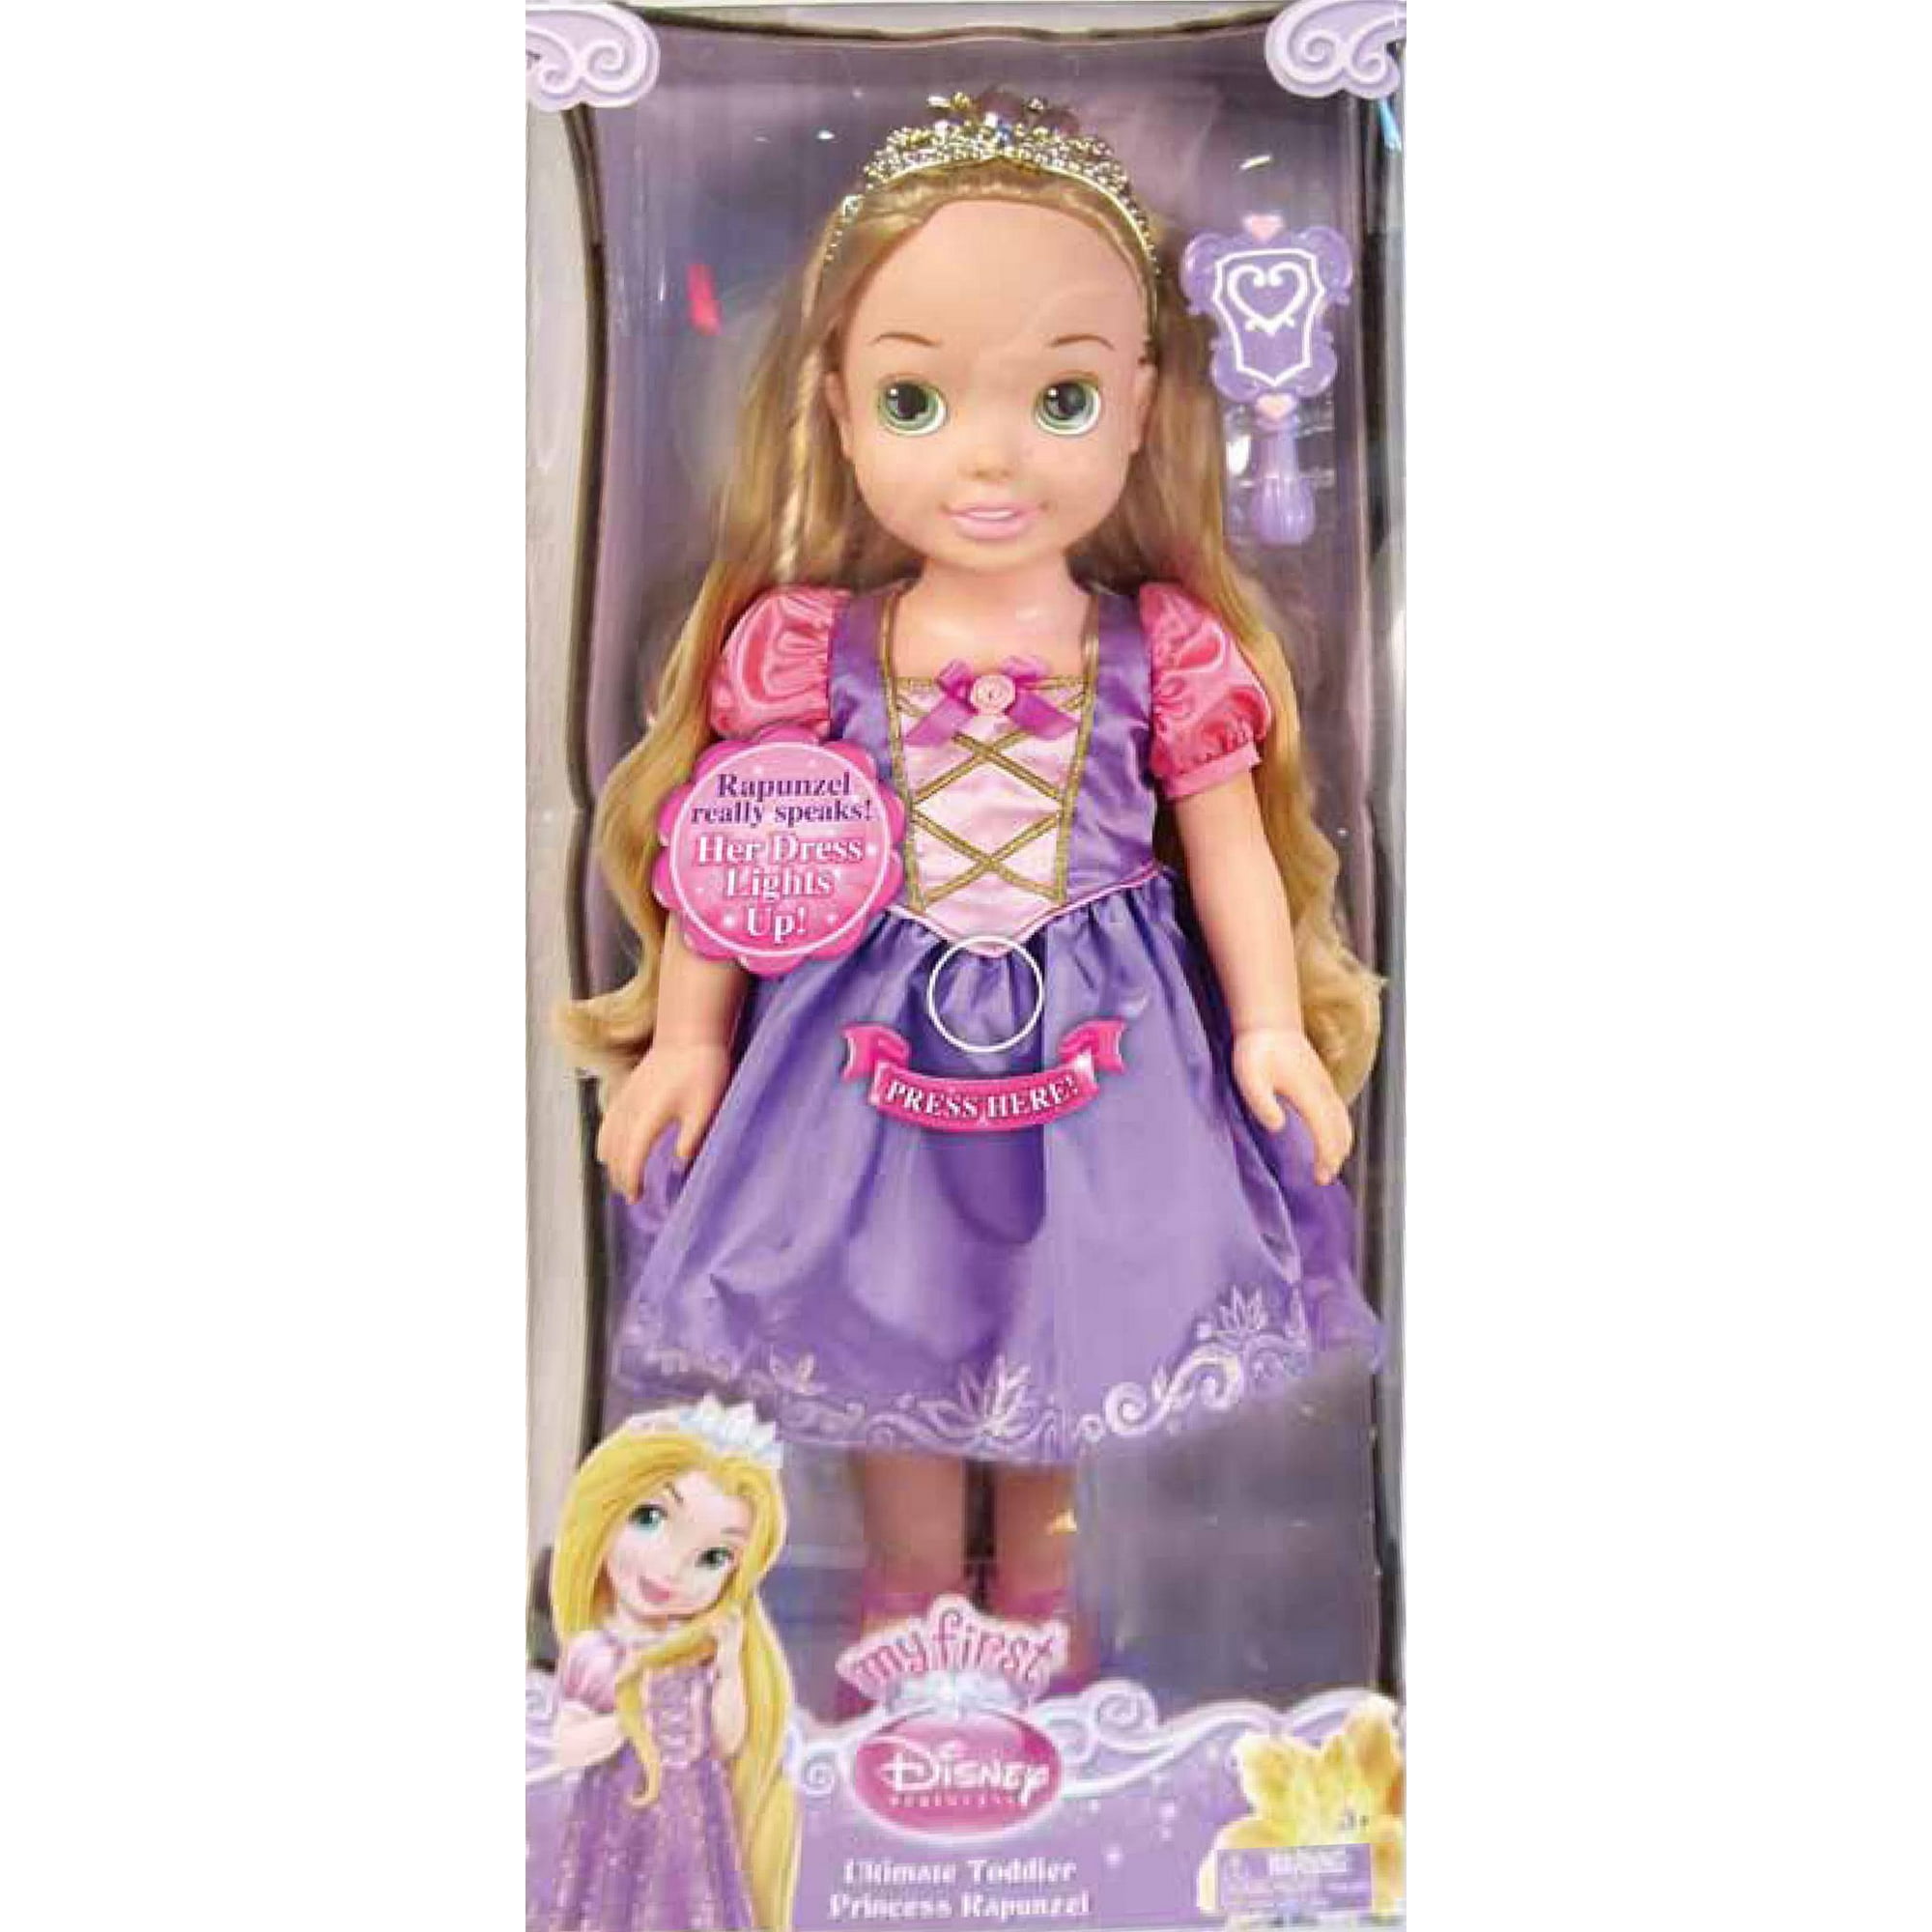 10 Set Doll Clothes Including 3 Sequins Dresses 3 Floral Dresses 4 Casual  Outfits Tops and Pants for 11.5 Inch Girl Doll : : Toys & Games